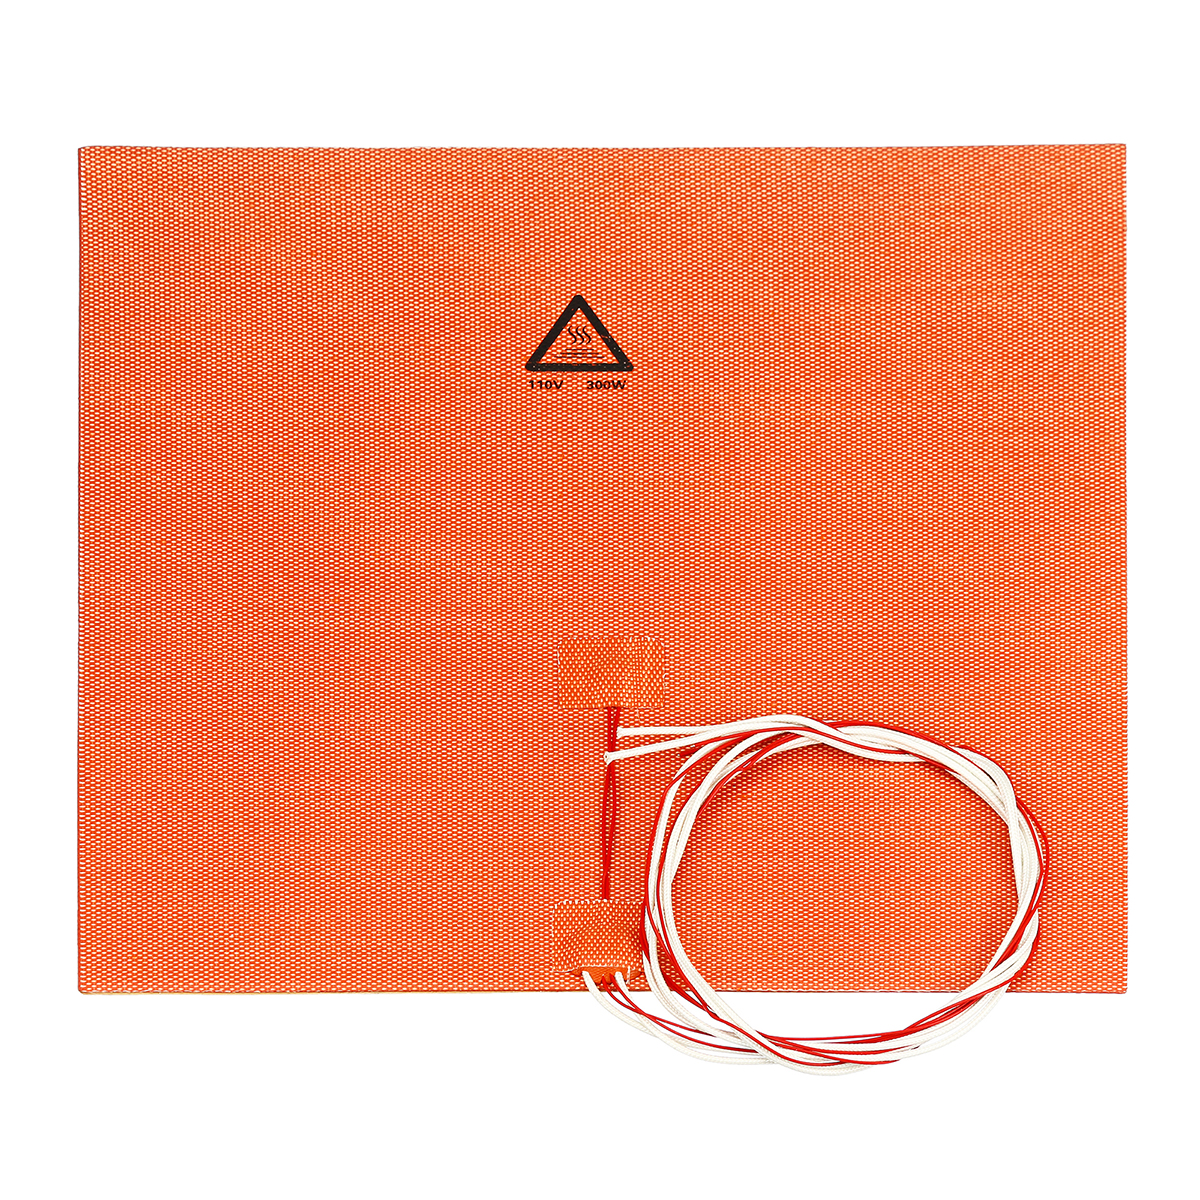 

300*300mm 300w 110V/220V Silicone Heated Bed Heating Pad for 3D Printer